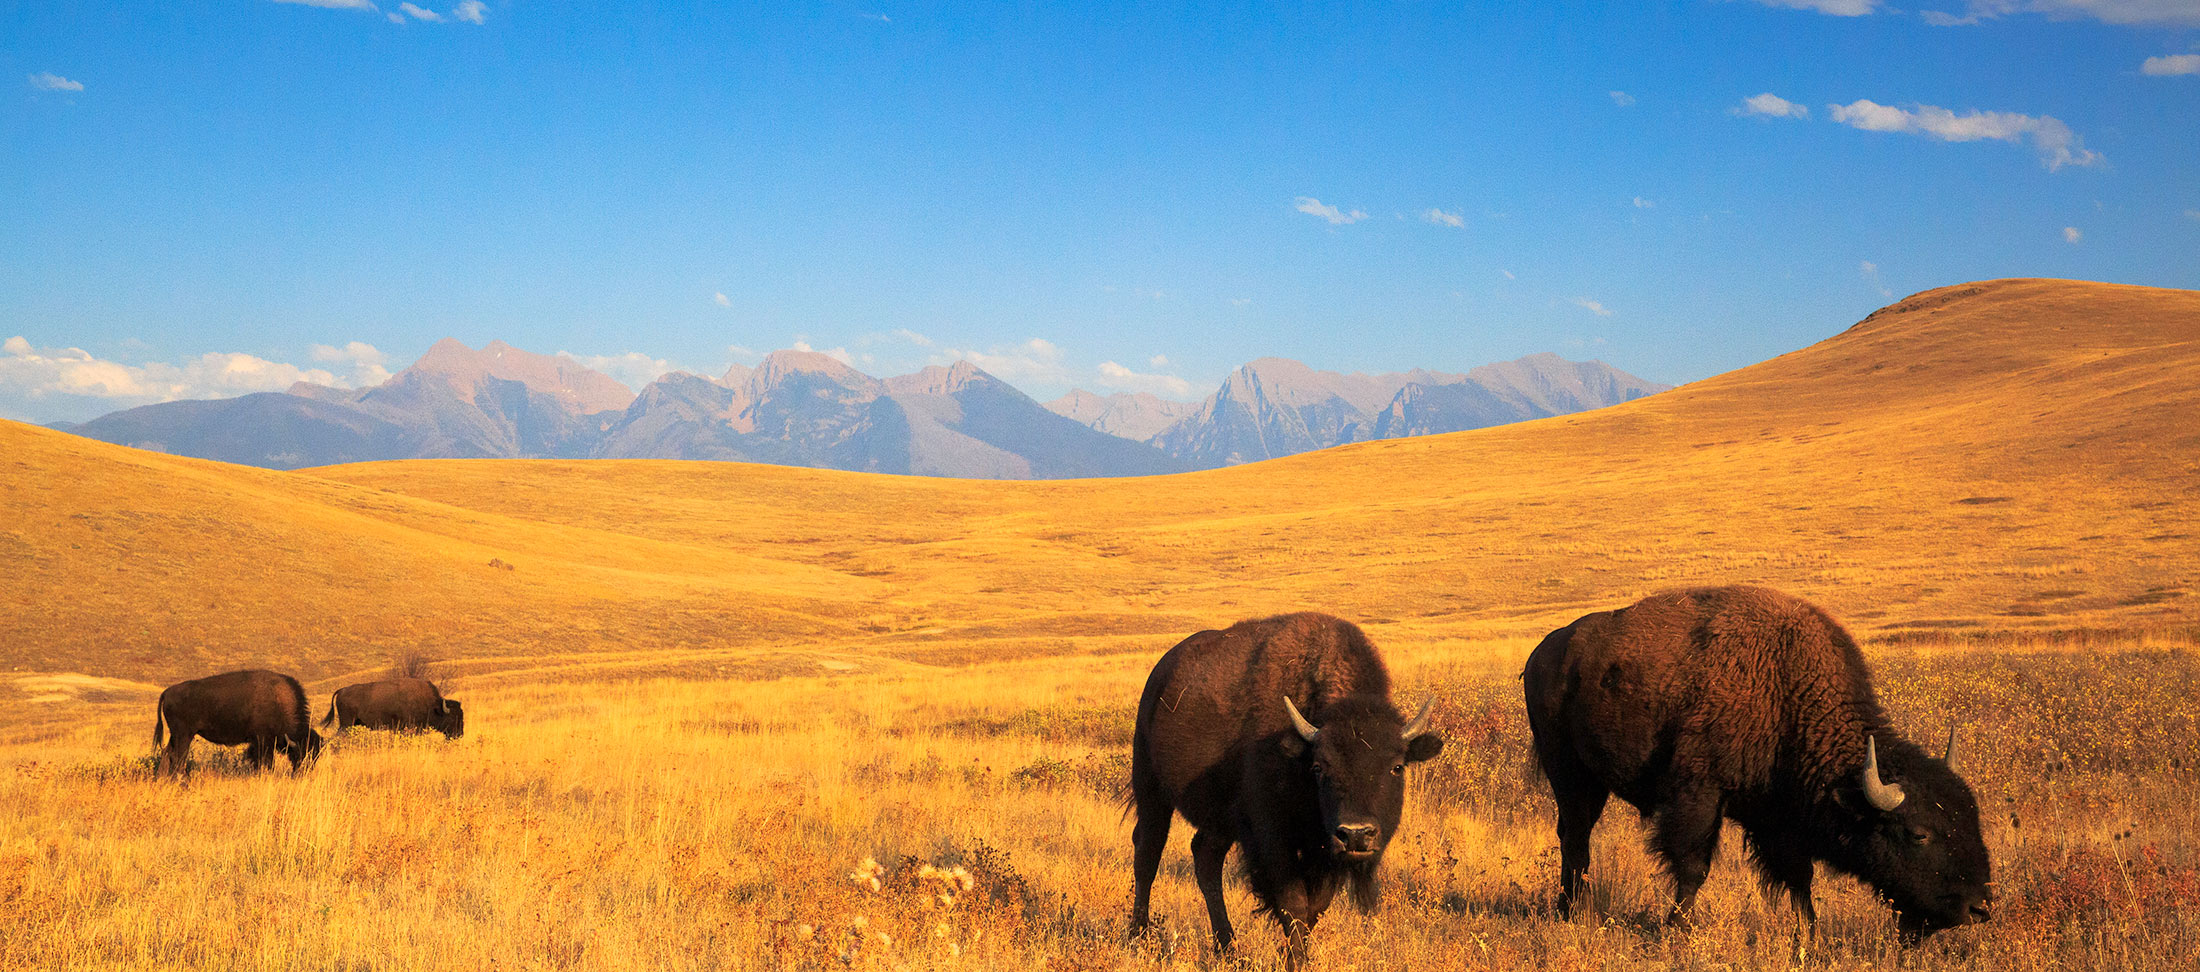 Do some wildlife viewing in the fall in Western Montana. Areas include the Lee Metcalf National Wildlife Refuge, Glacier National Park and the CSKT Bison Range.